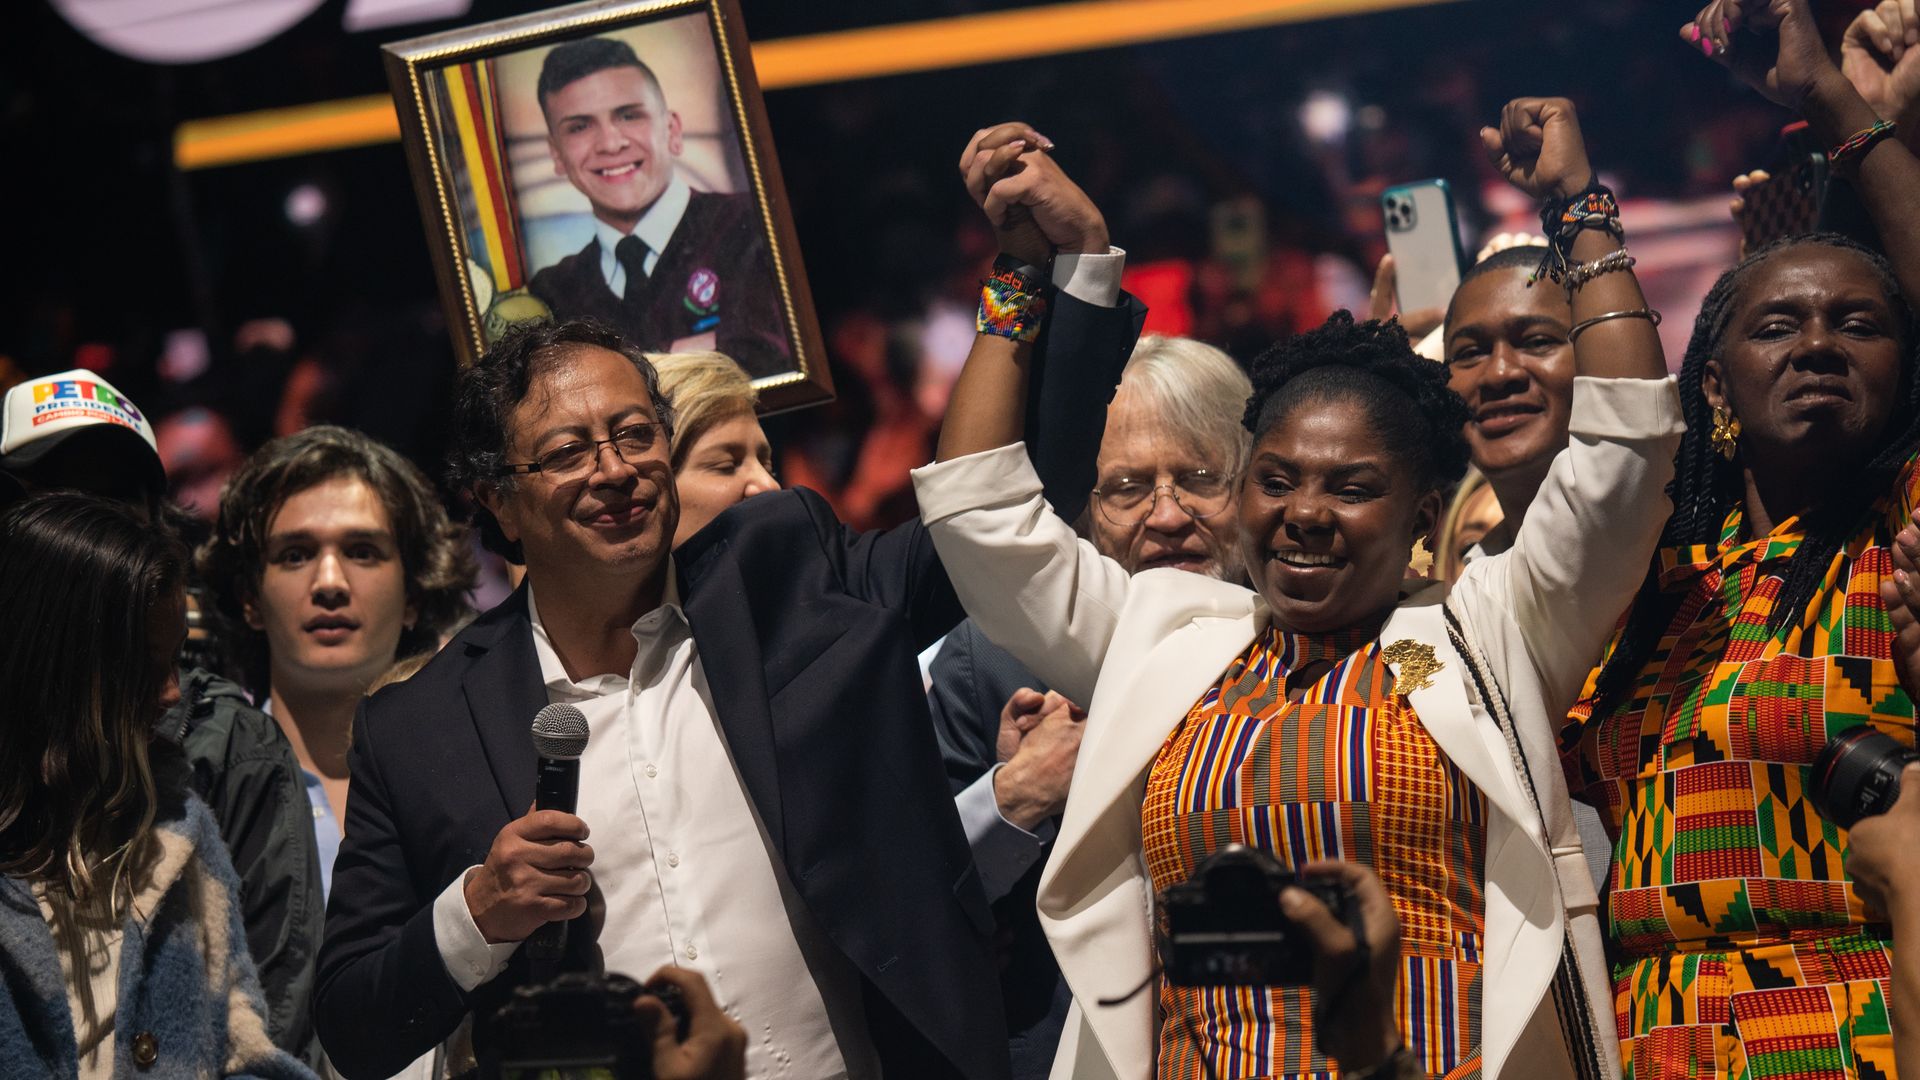 President-elect Gustavo Petro and VP-elect Francia Márquez celebrate their victory, June 19. Photo: Andrés Cardona/Bloomberg via Getty Images